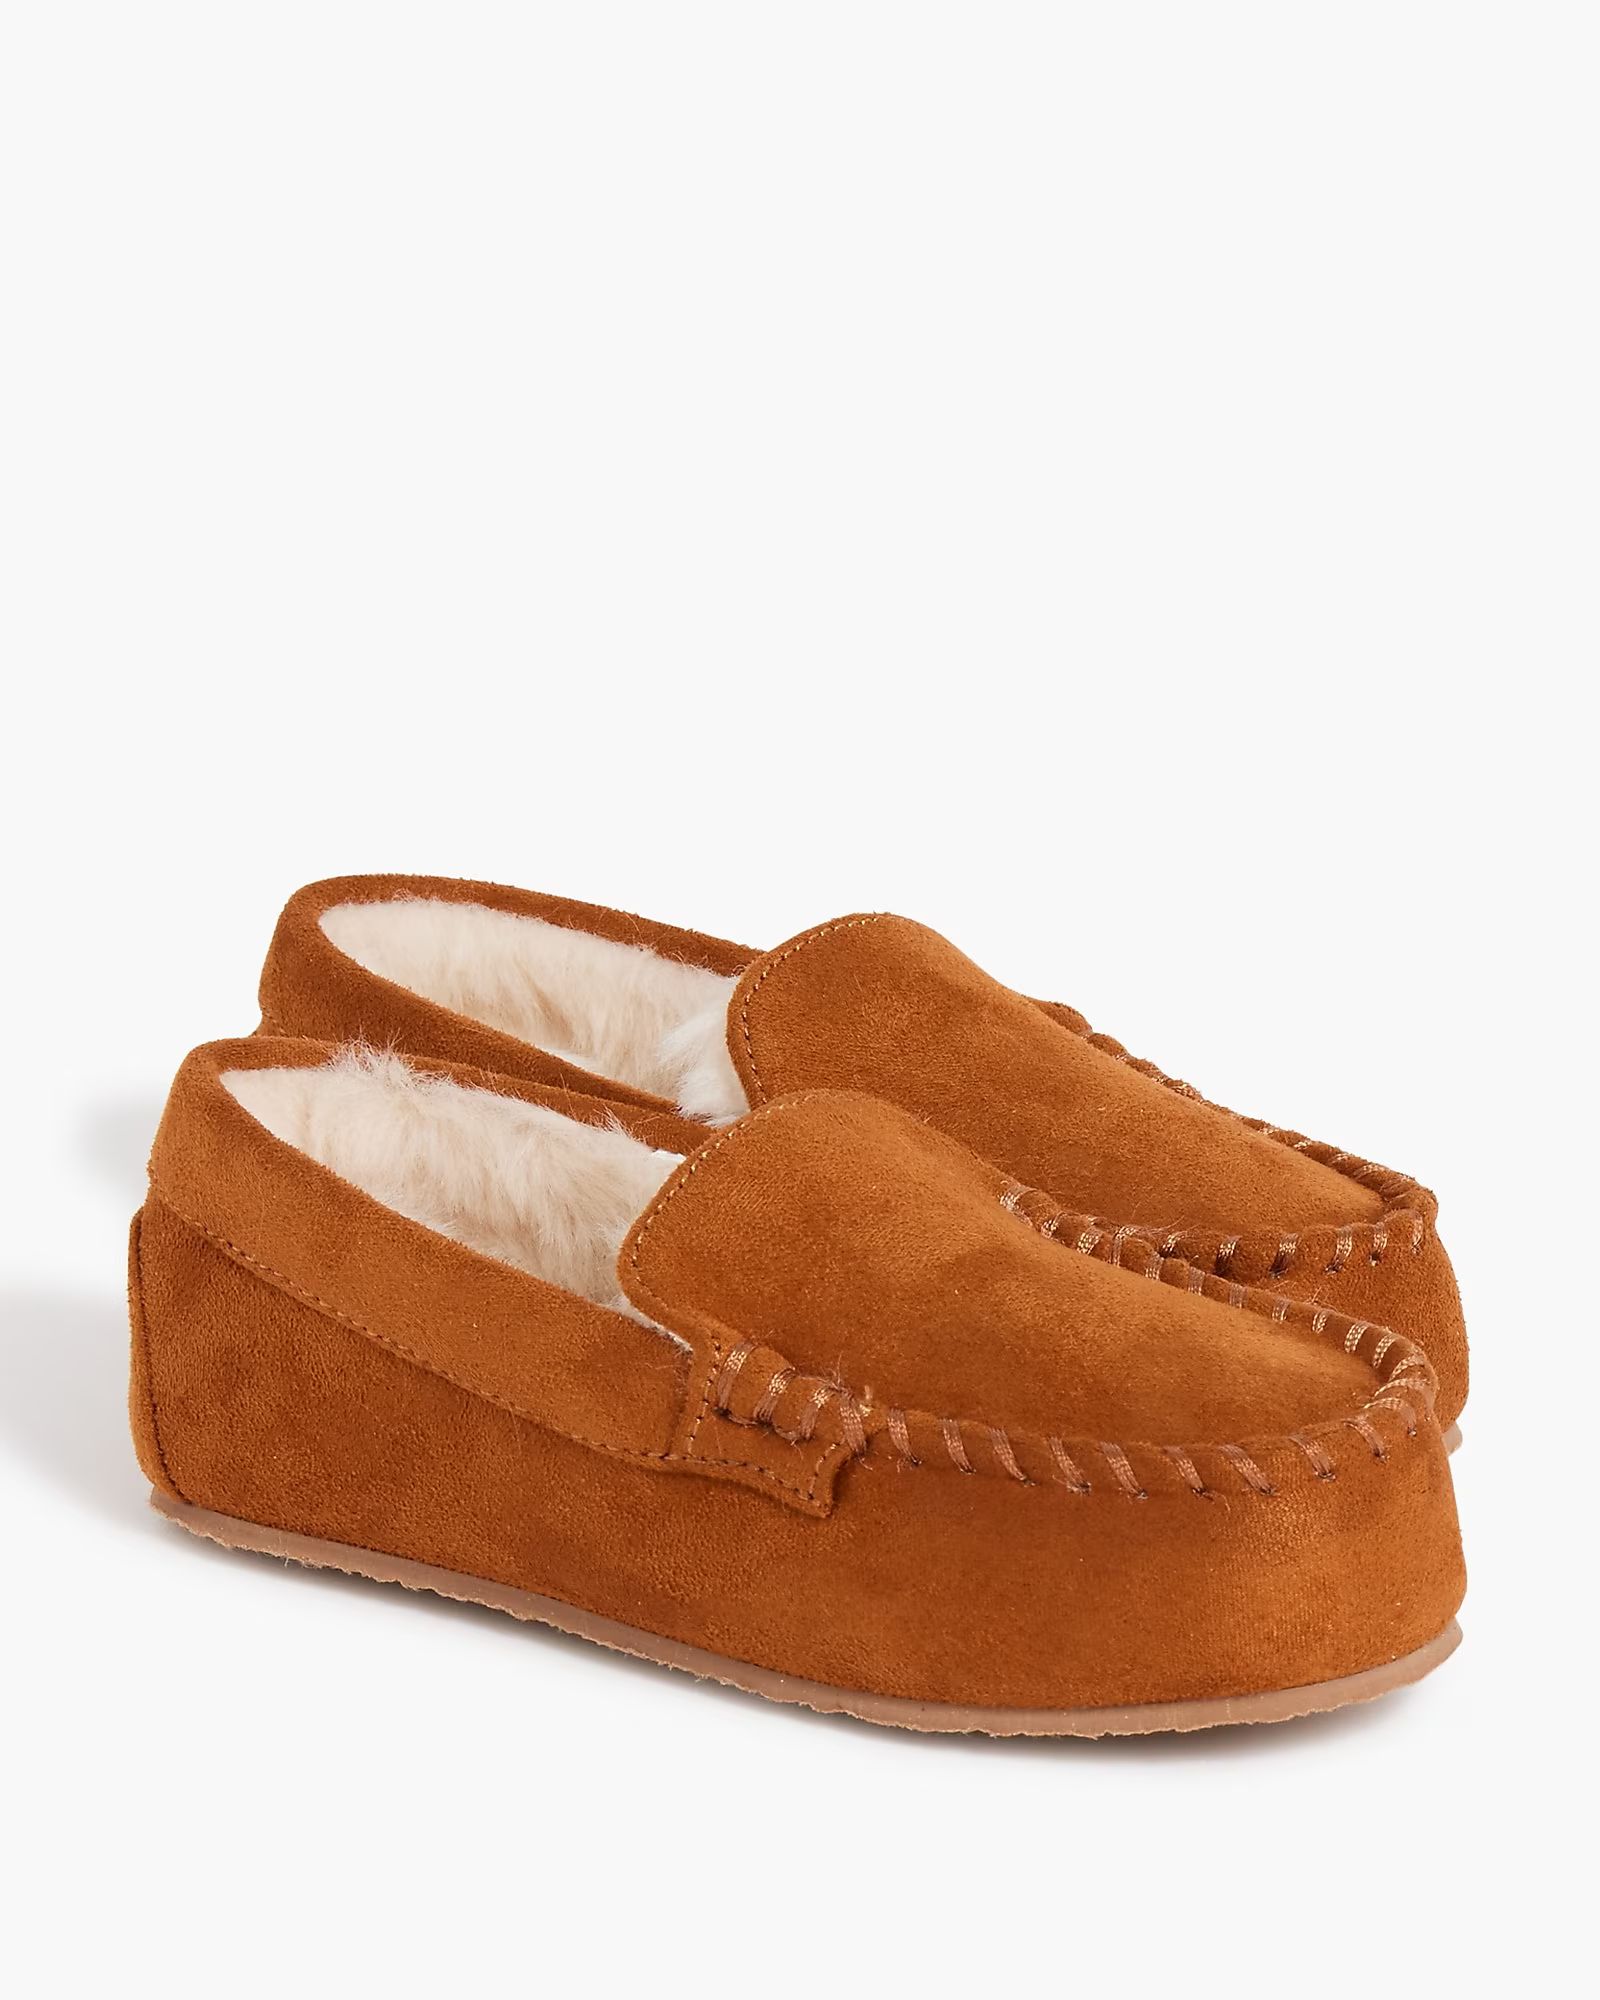 Kids' sherpa-lined slippers | J.Crew Factory